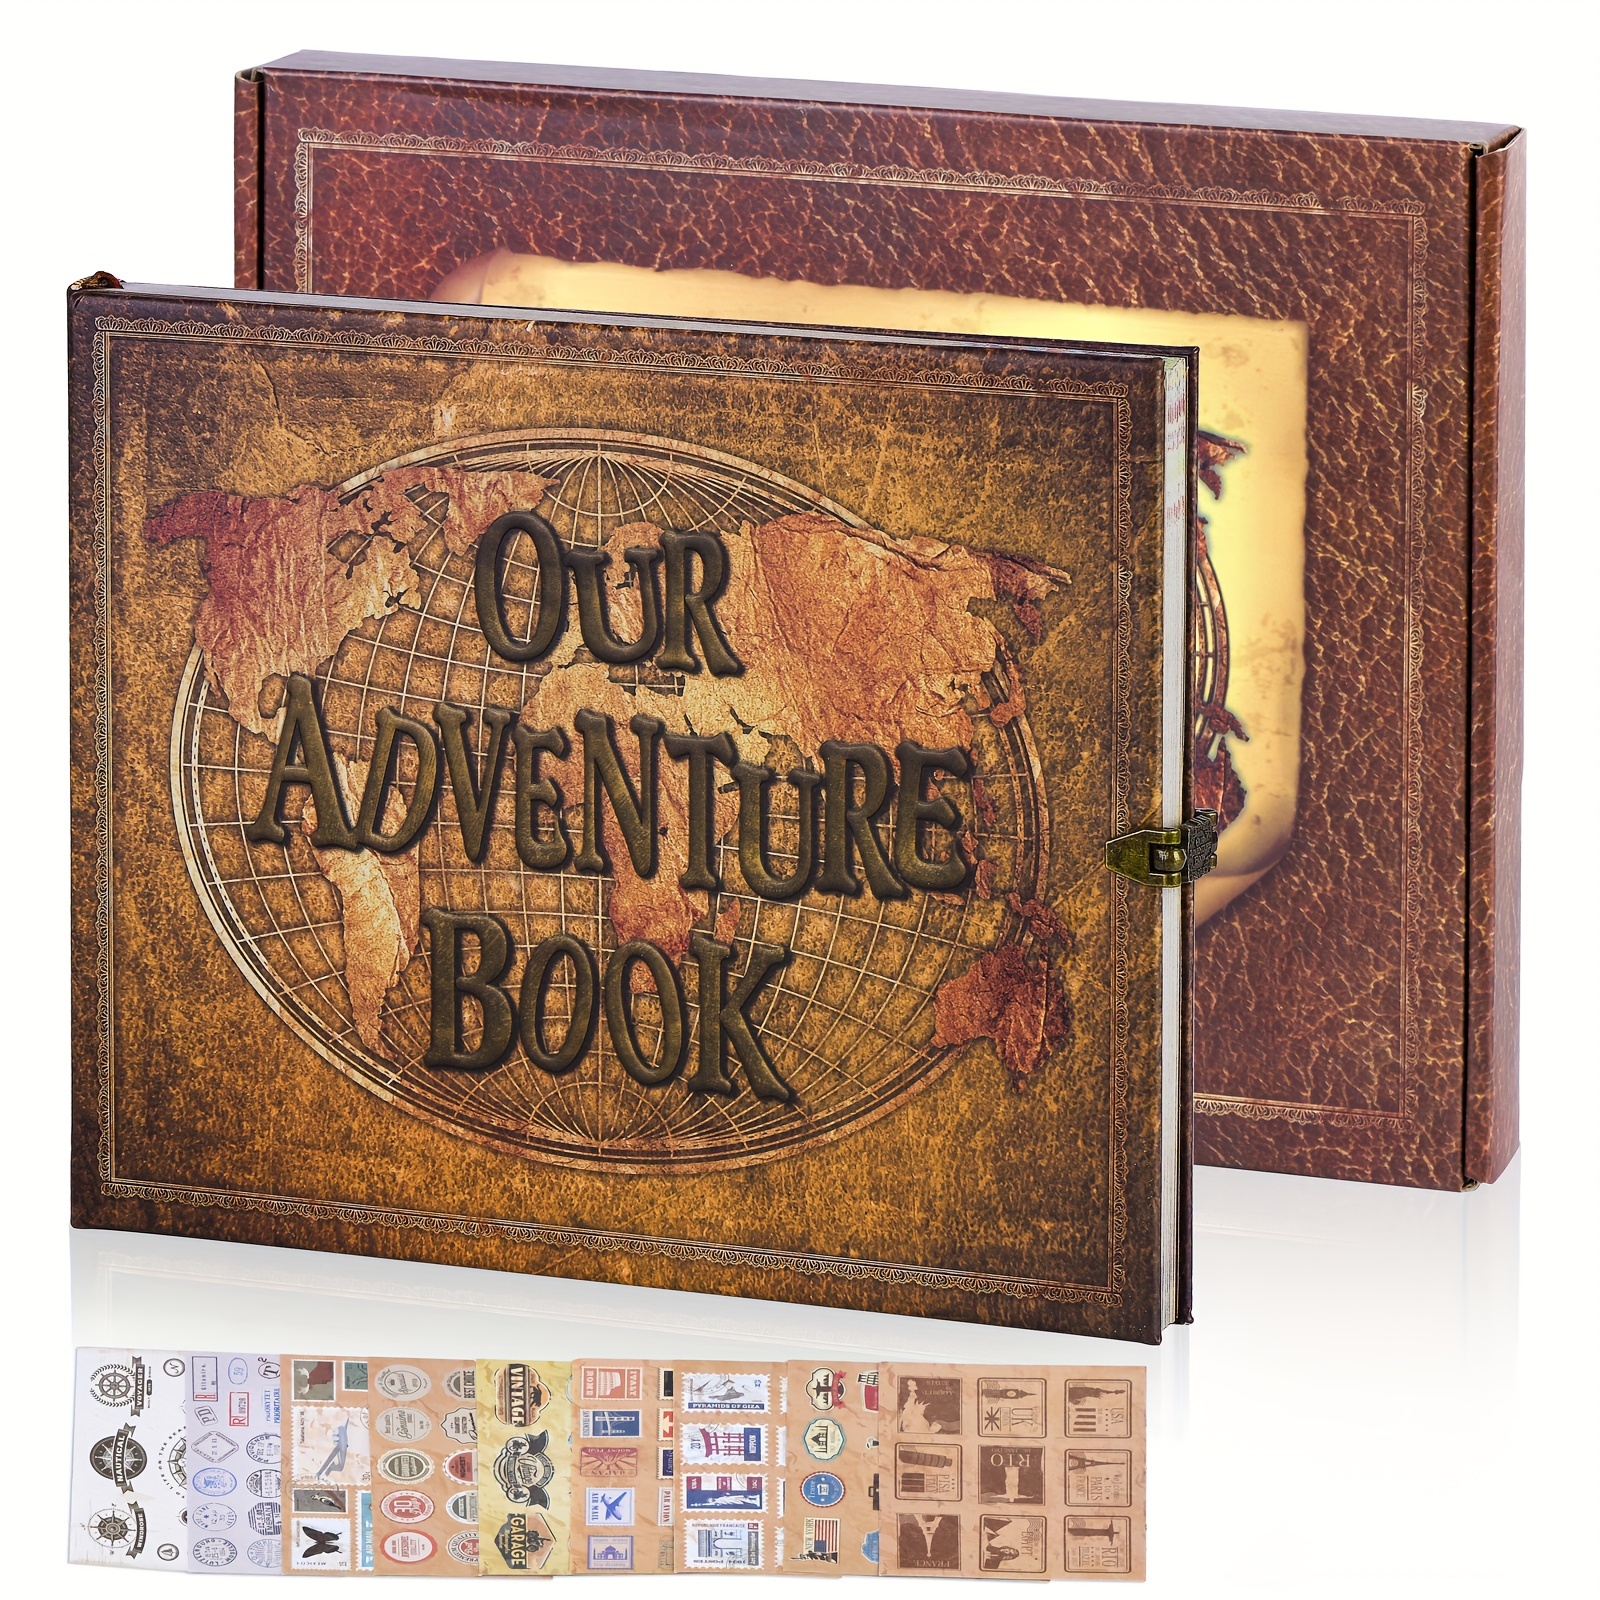  Scrapbook Photo Album,Our Adventure Book Scrapbook, Embossed  Words Hard Cover Movie Up Travel Scrapbook for Anniversary, Wedding,  Travelling, Baby Shower, etc (Leather Adventure Book)